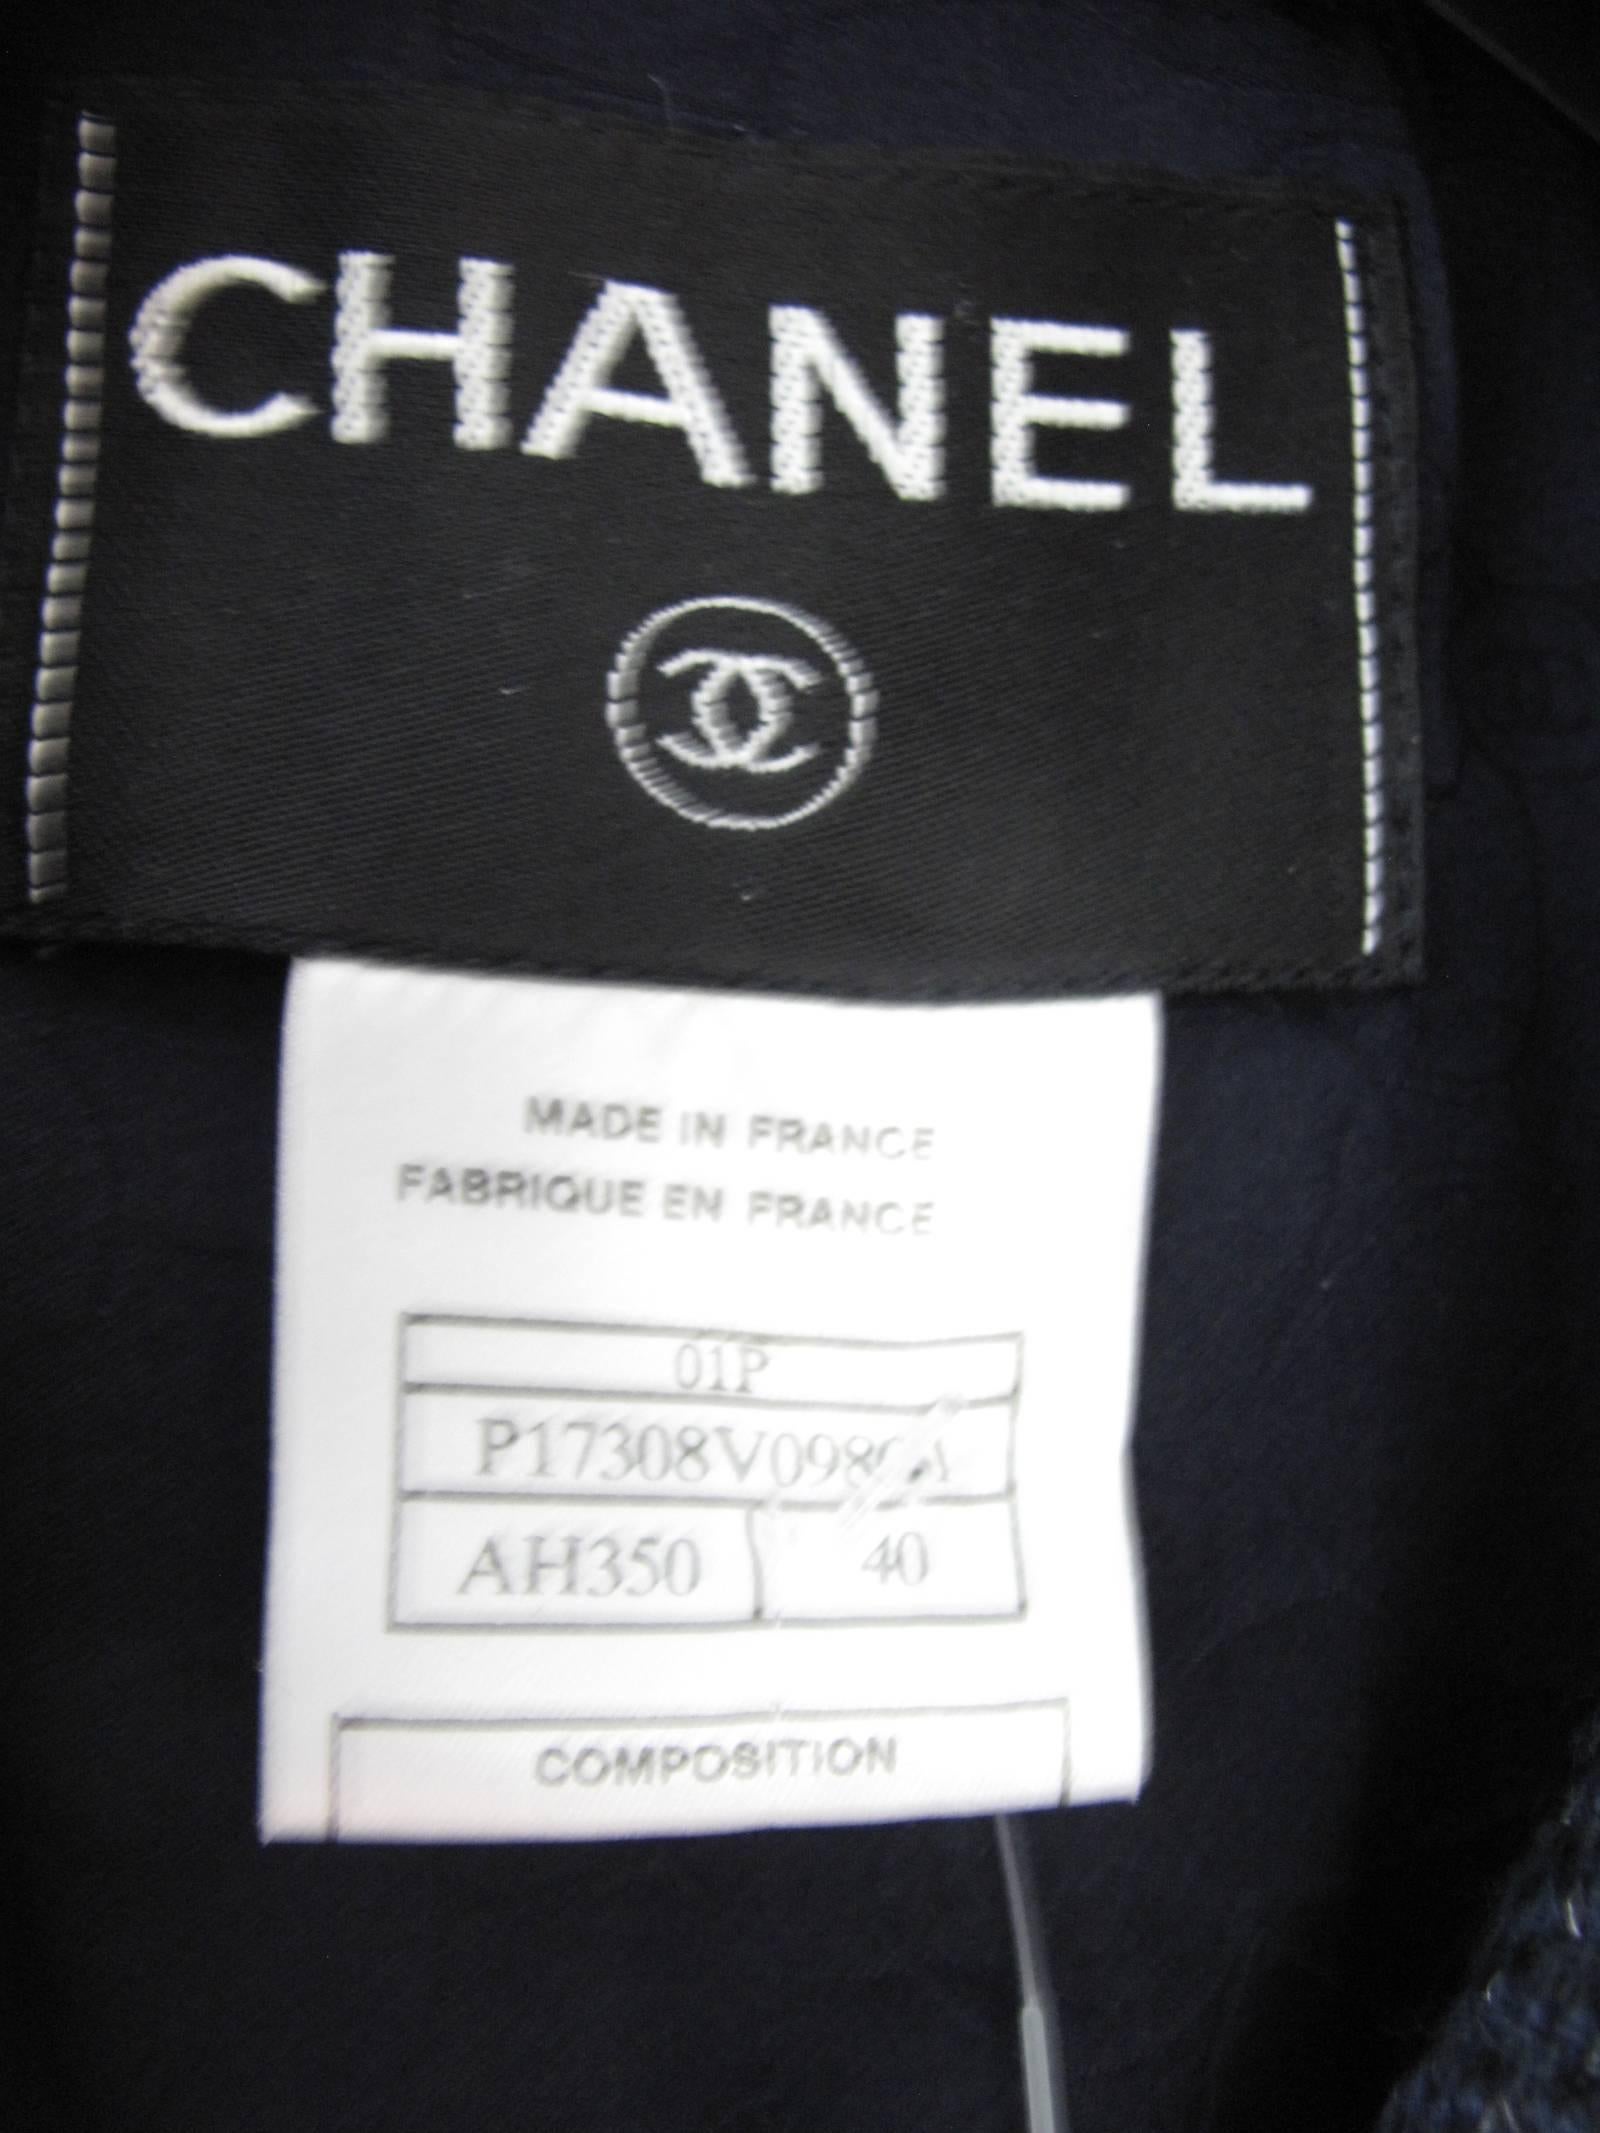 Black Chanel Navy Jacket with Fabric Woven to Sparkle